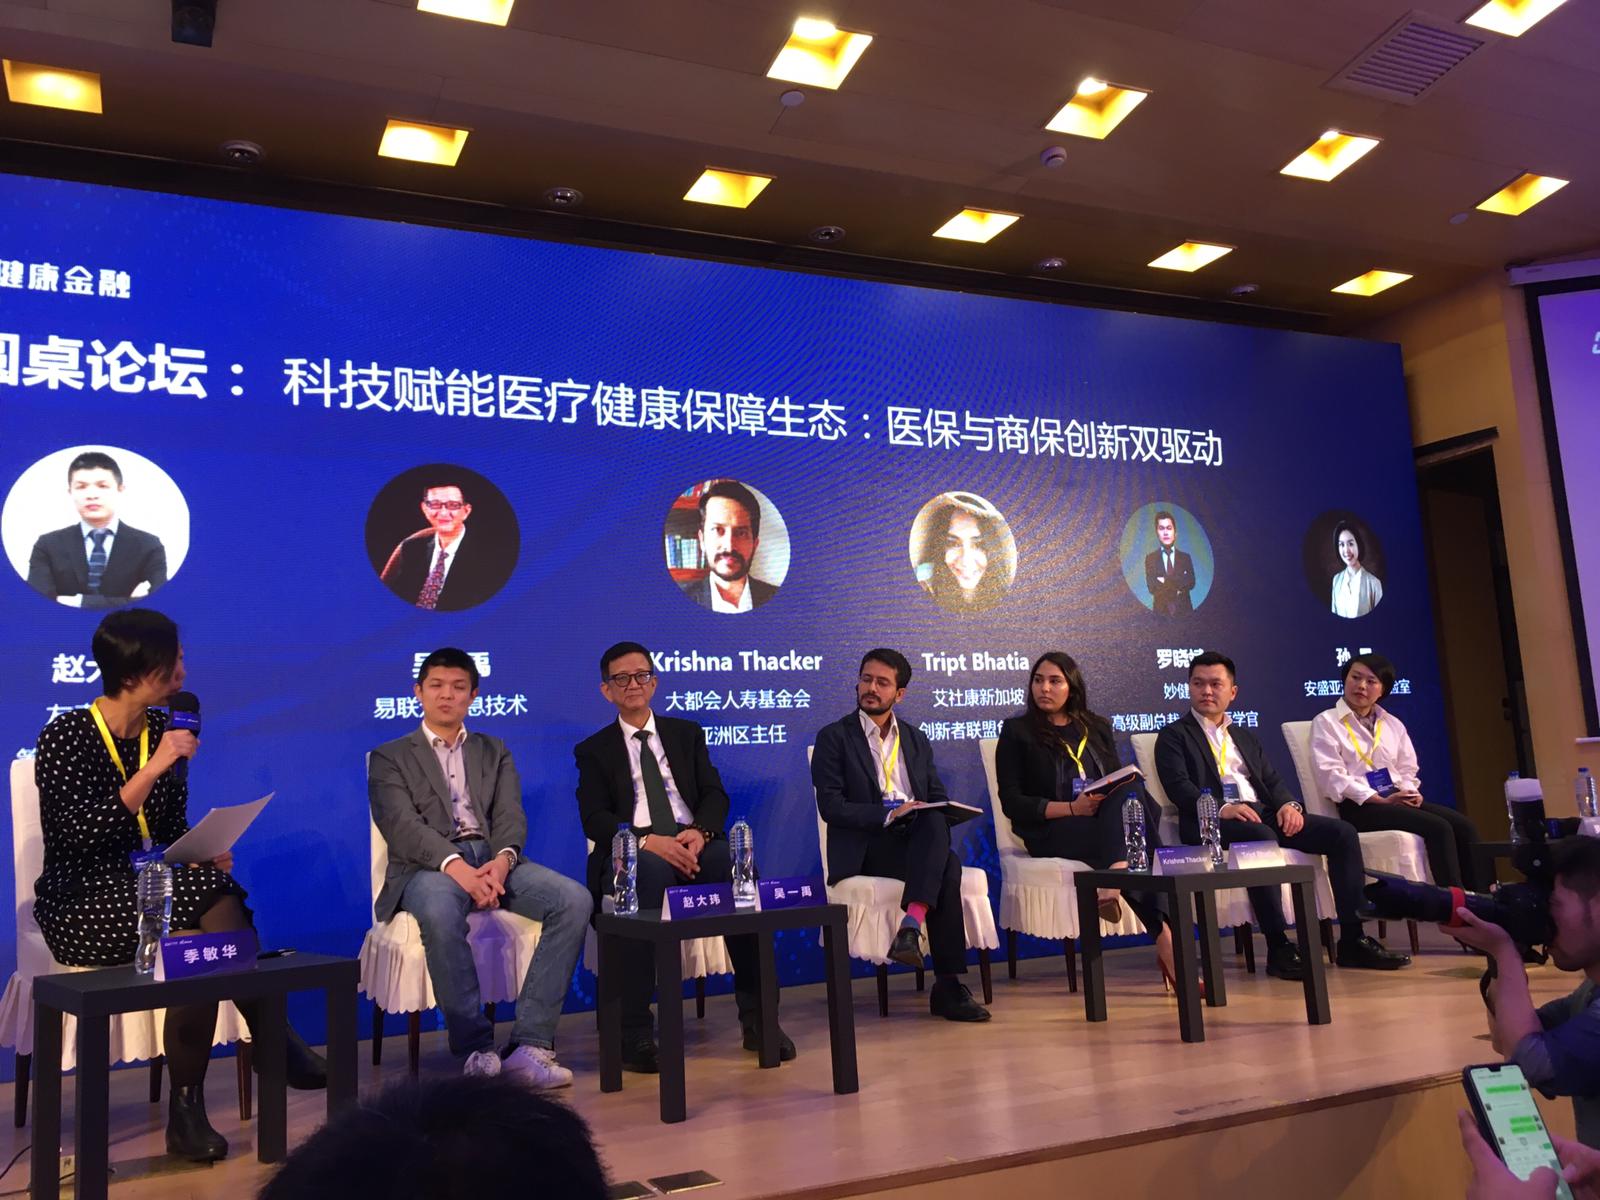 The 3rd Annual China International Healthcare and Finance Innovation Forum, Shanghai